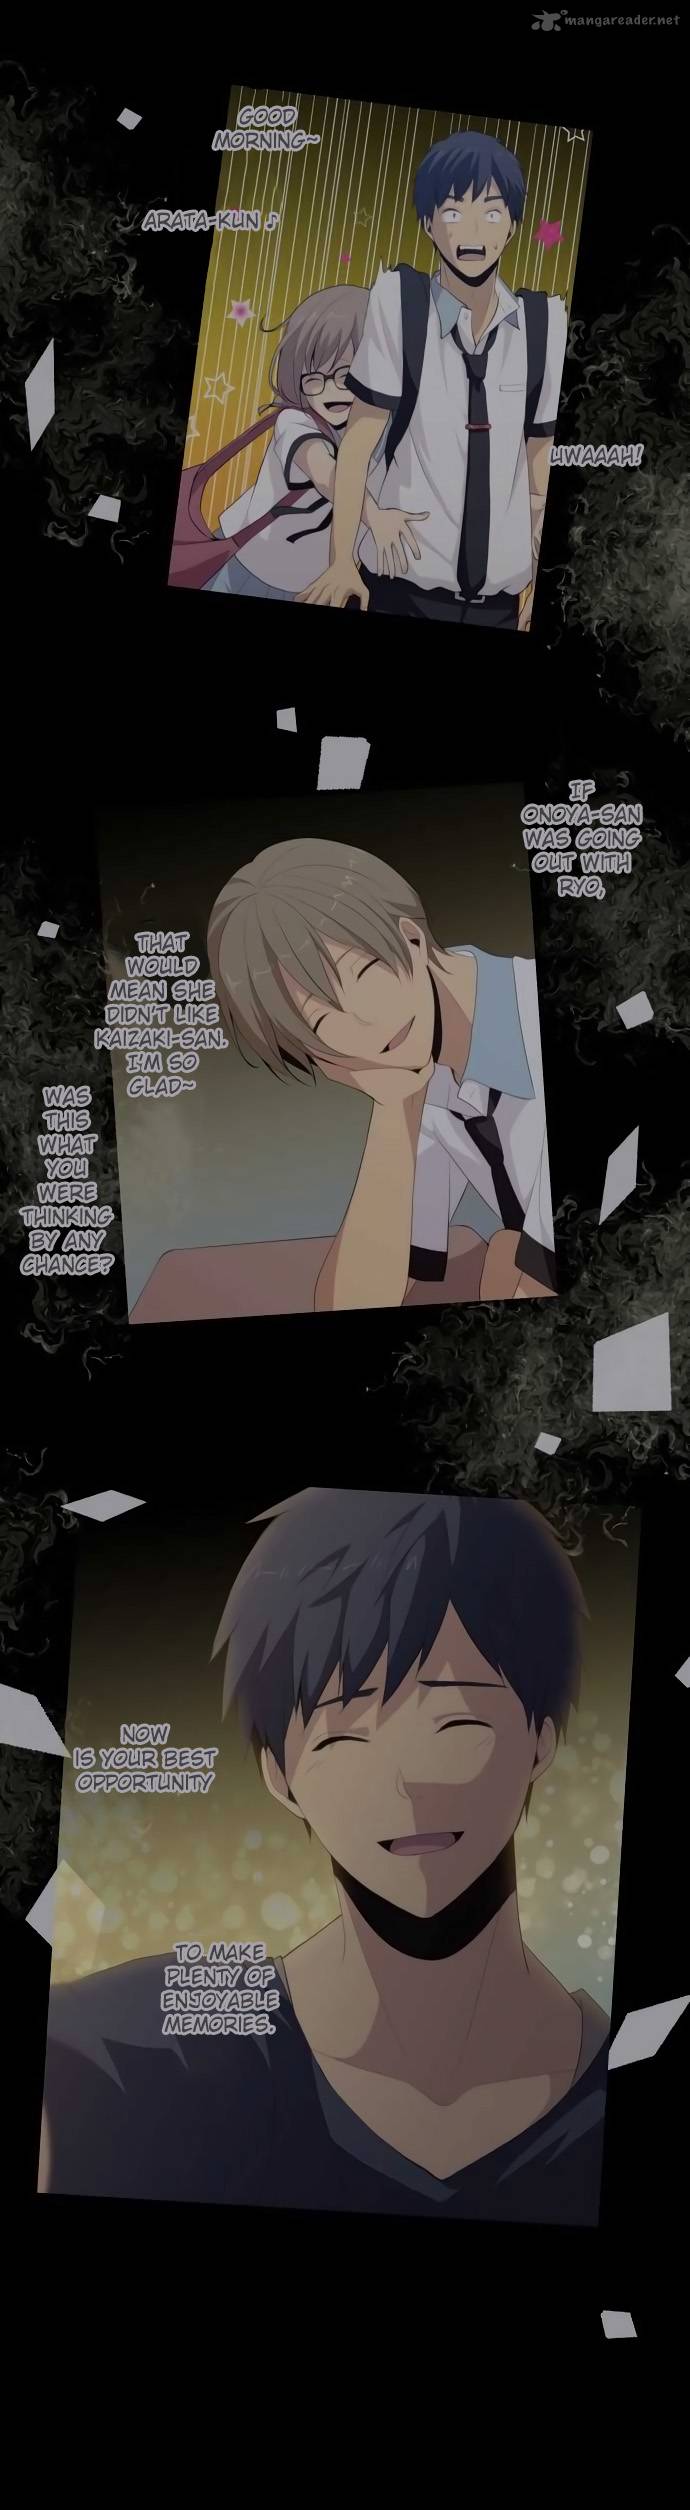 Relife 111 11